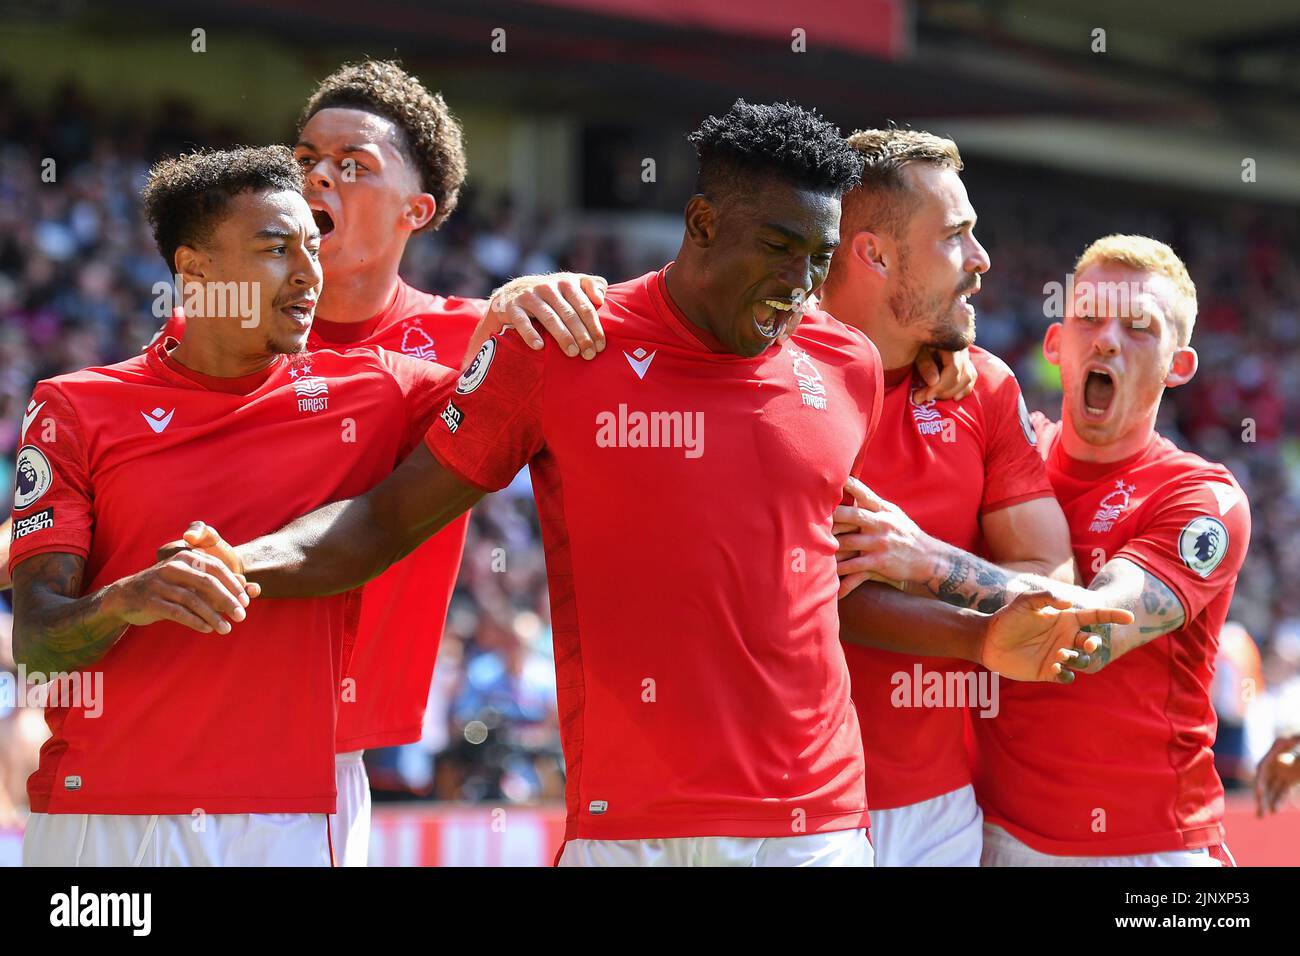 Nottingham, UK. 14th August 2022during the Premier League match between Nottingham Forest and West Ham United at the City Ground, Nottingham on Sunday 14th August 2022. (Credit: Jon Hobley | MI News) Credit: MI News & Sport /Alamy Live News Stock Photo